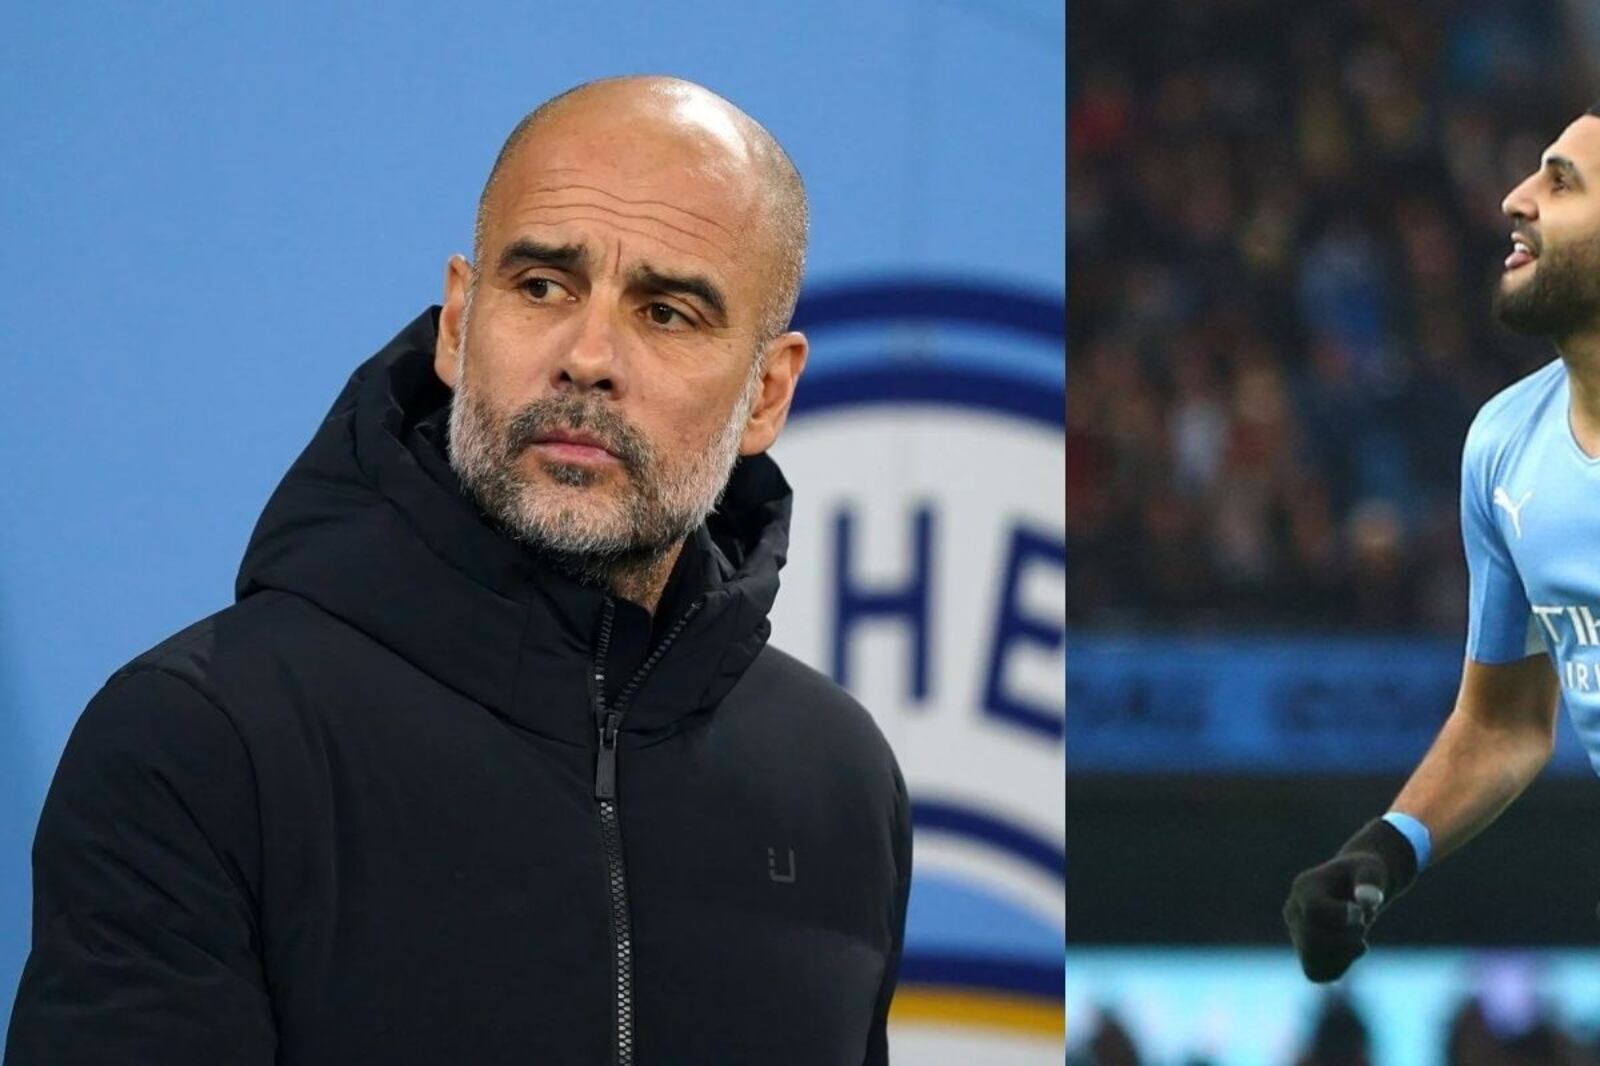 Welcome to Manchester City, Pep Guardiola found Mahrez's replacement